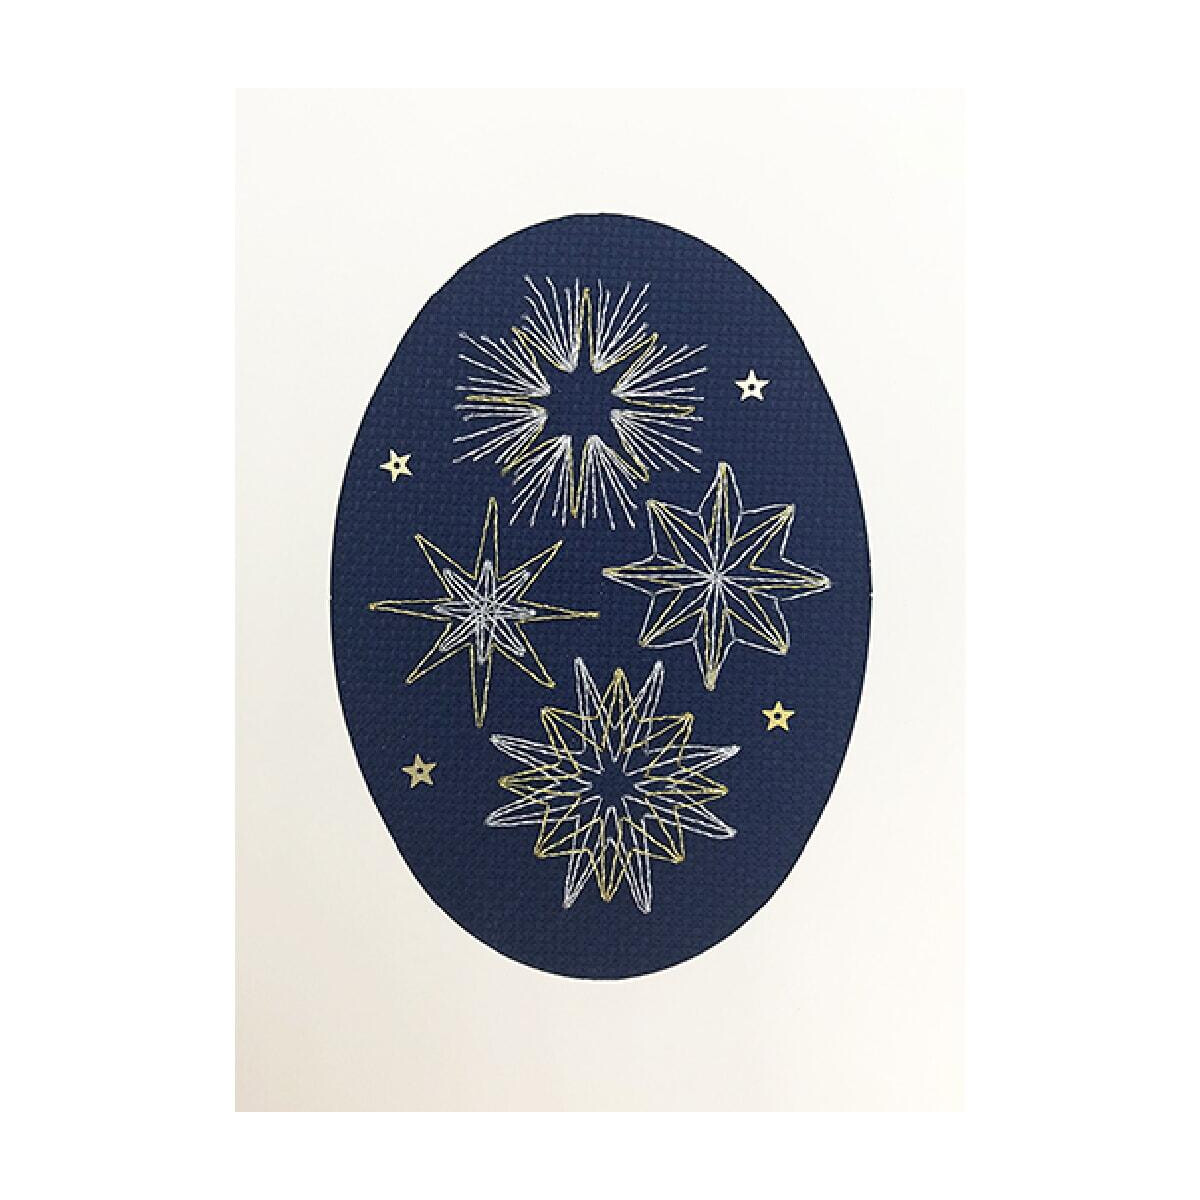 A dark blue oval frame features four intricate star...